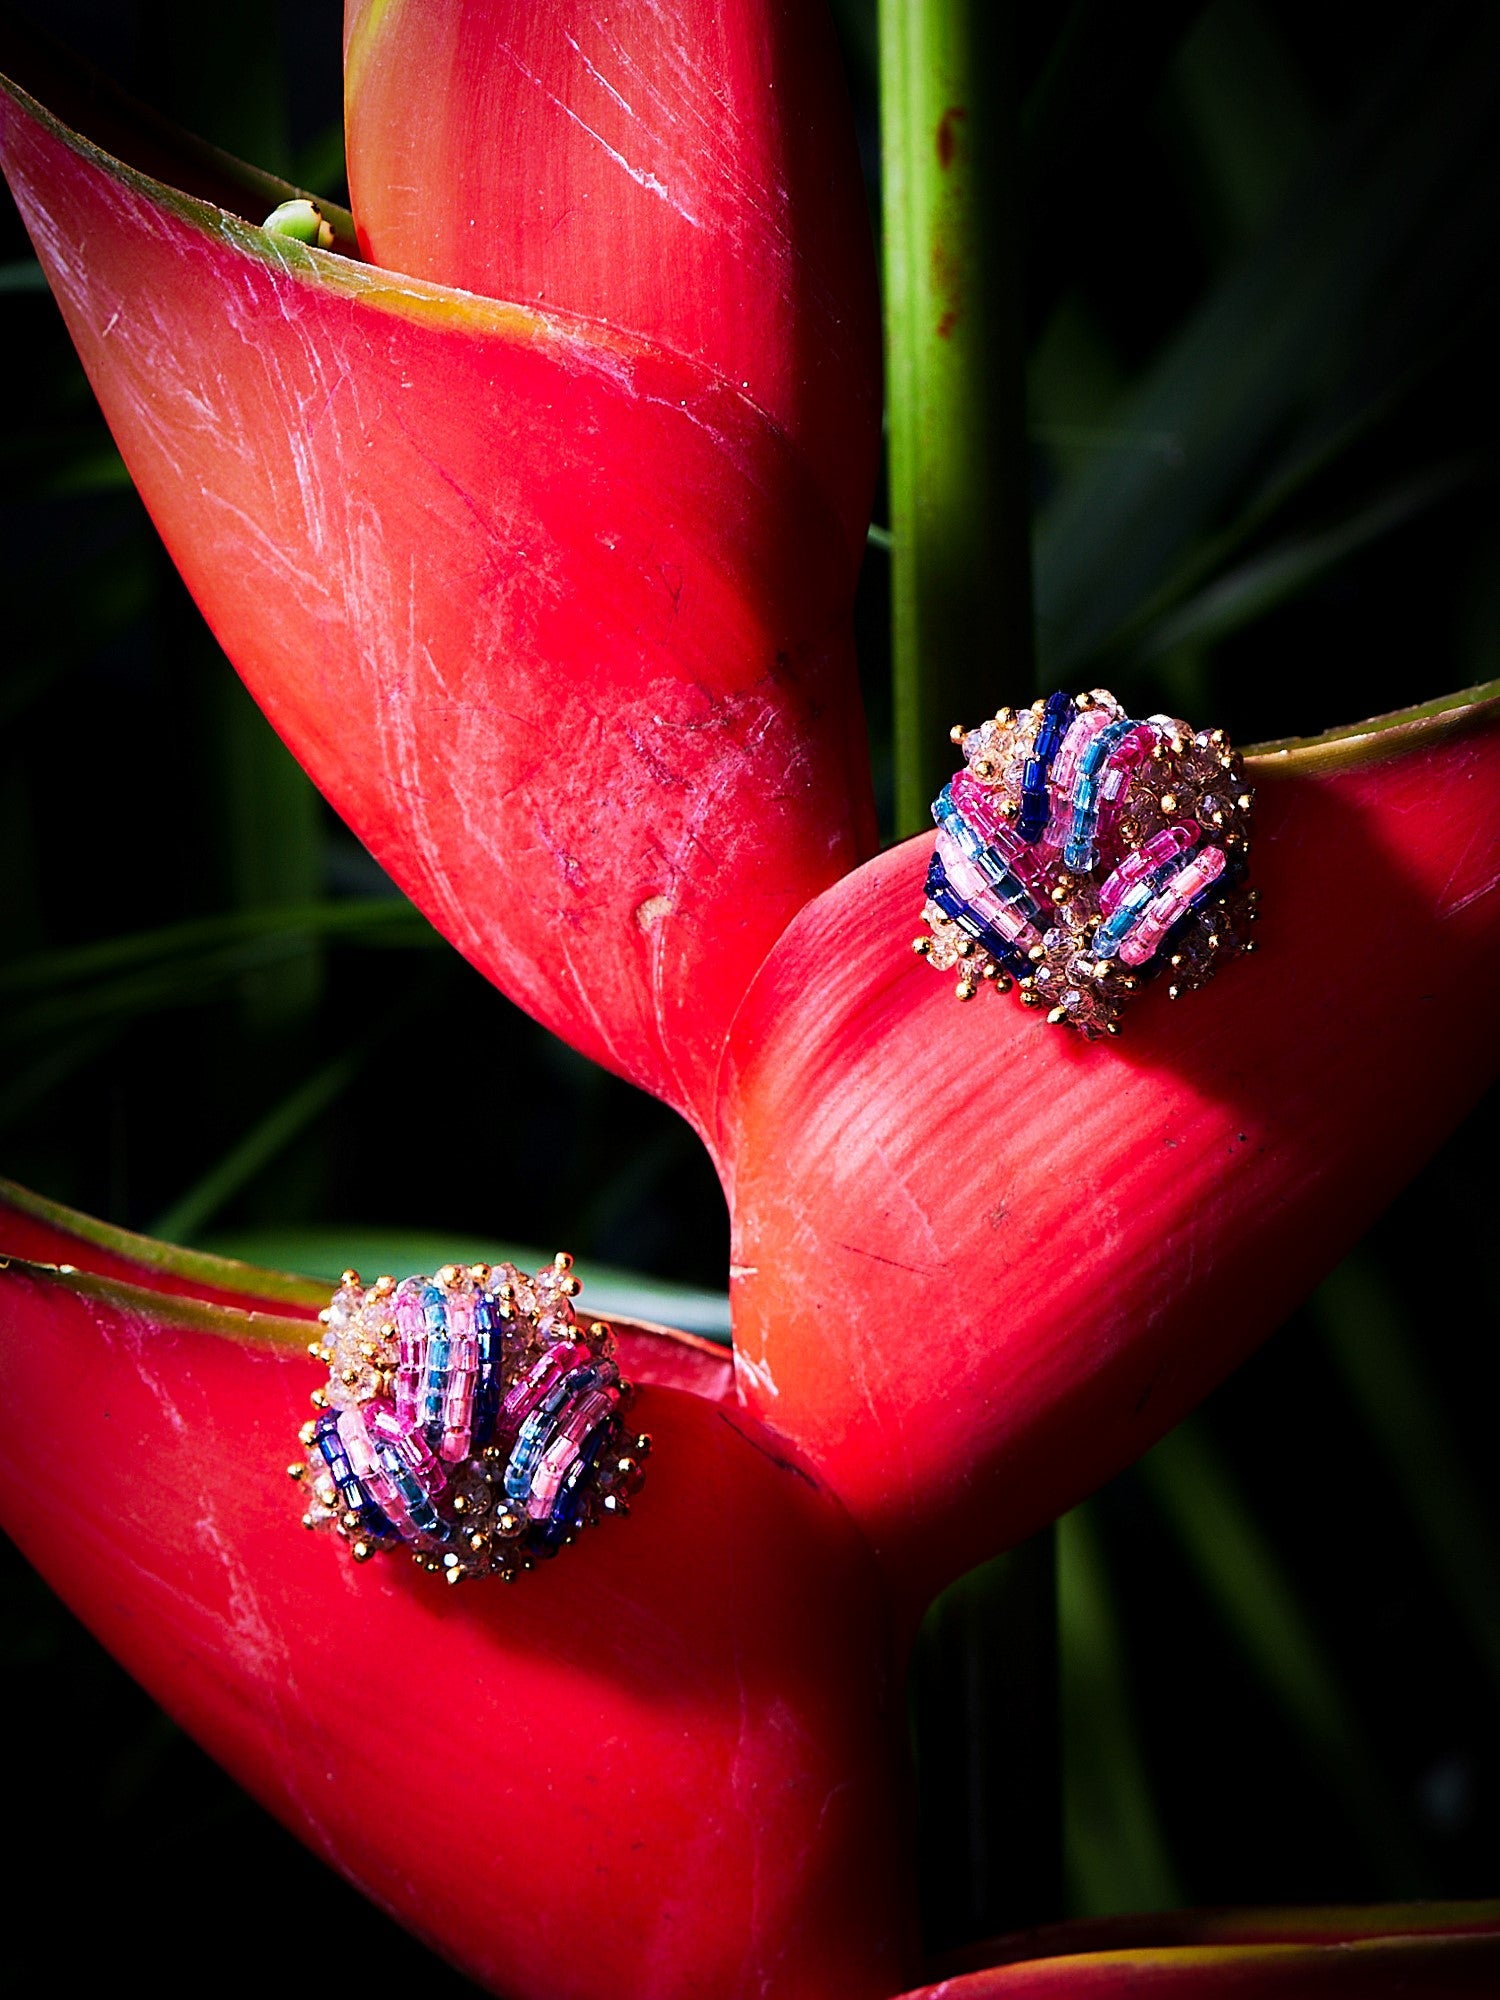 MIMOSA COLORED STUDS - House of Doro